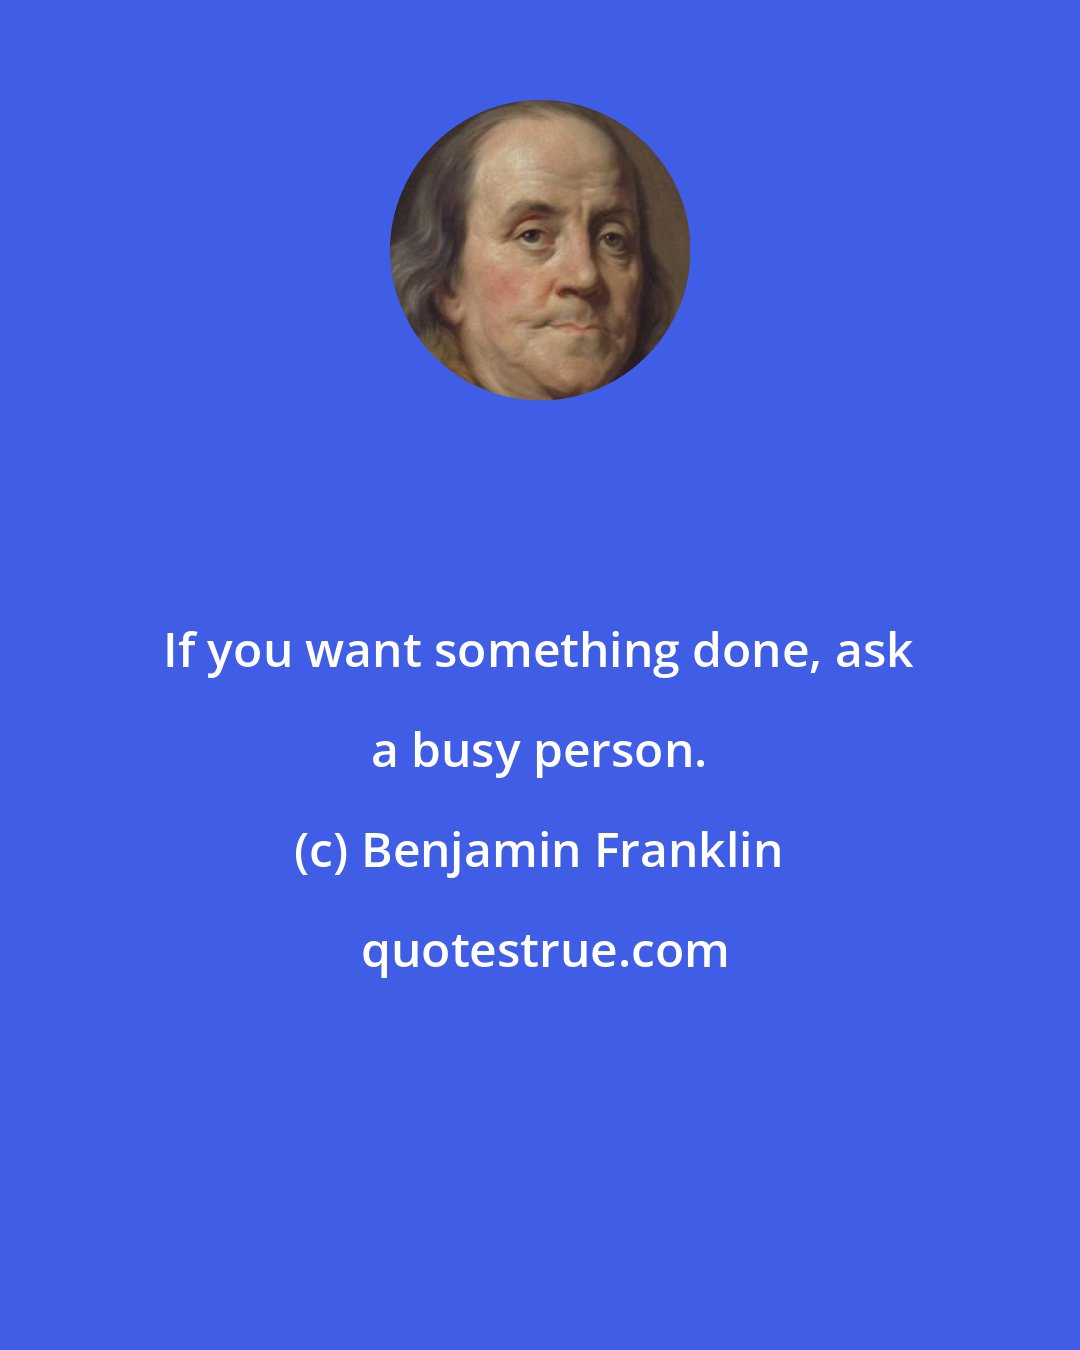 Benjamin Franklin: If you want something done, ask a busy person.